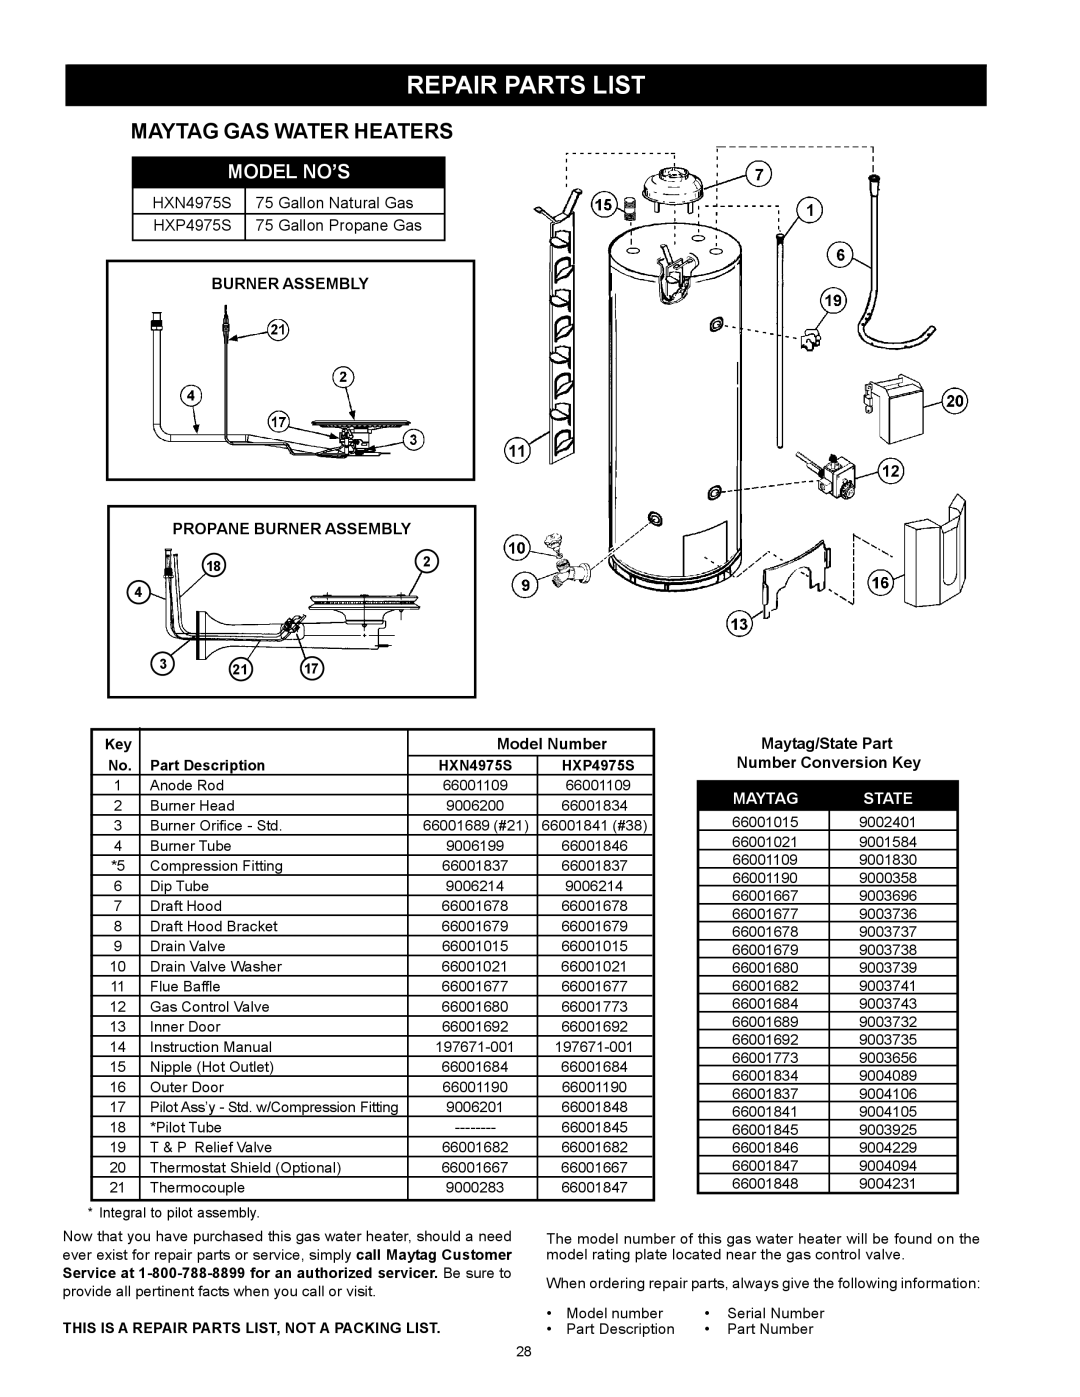 Maytag HXN4975S manual Repair Parts List, Maytag Gas Water Heaters, Model No’S, State 